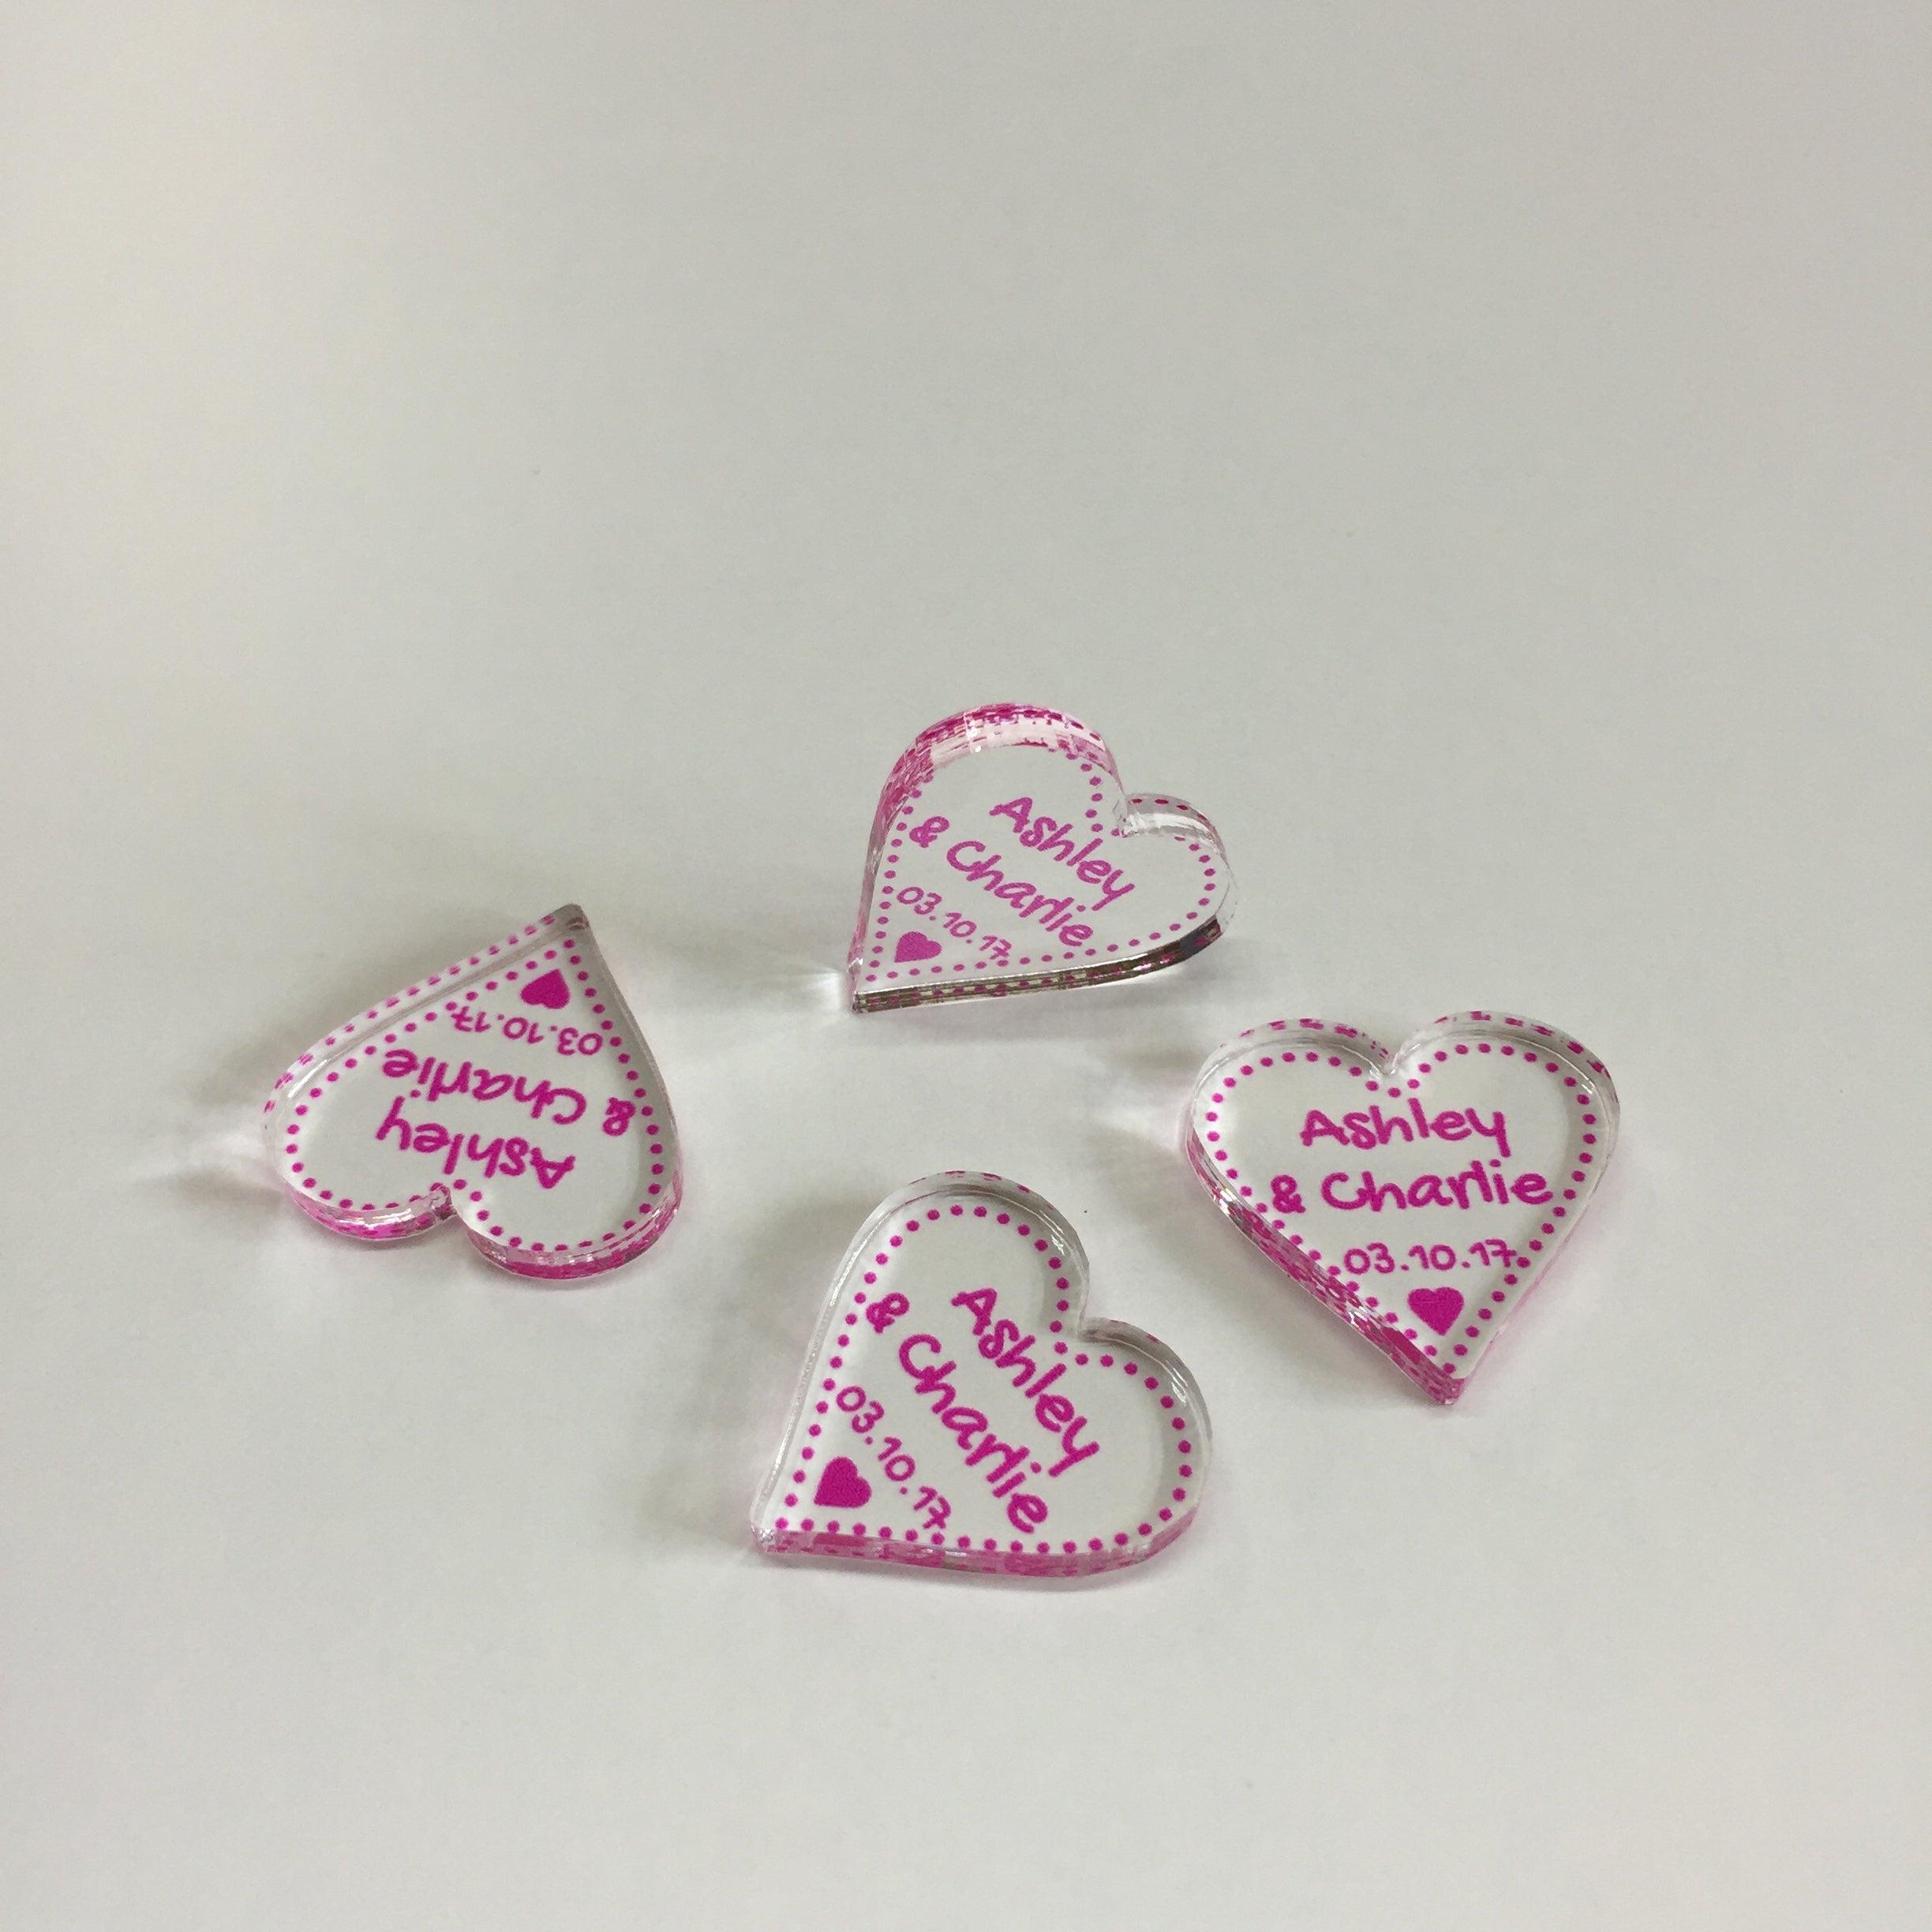 Personalised Wedding Favours - Clear Acrylic + Pink Acrylic Love Hearts